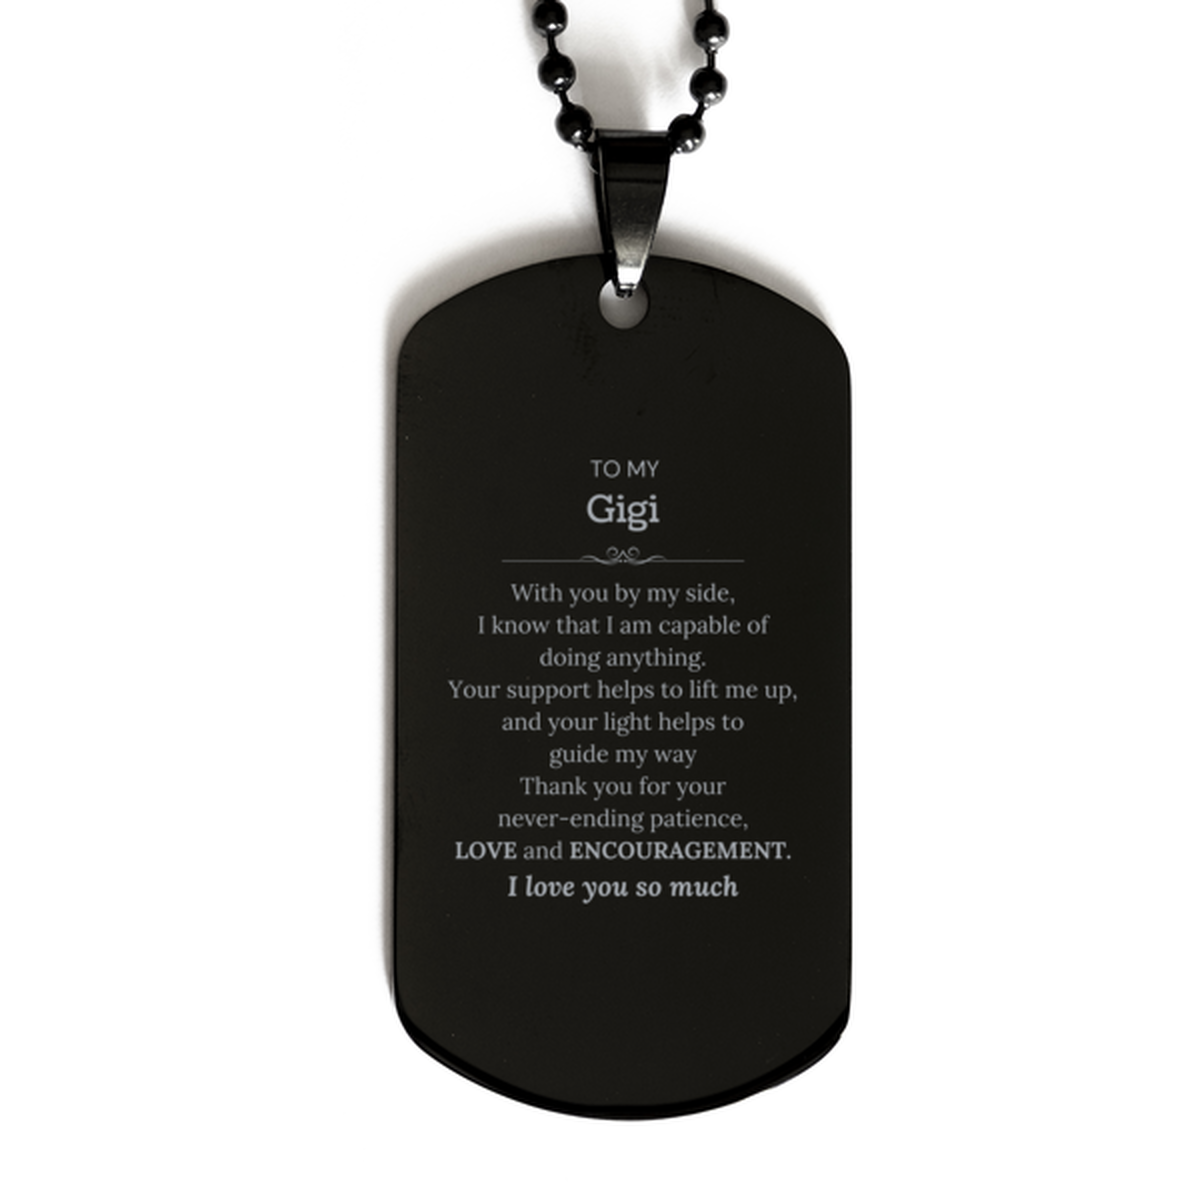 Appreciation Gigi Black Dog Tag Gifts, To My Gigi Birthday Christmas Wedding Keepsake Gifts for Gigi With you by my side, I know that I am capable of doing anything. I love you so much